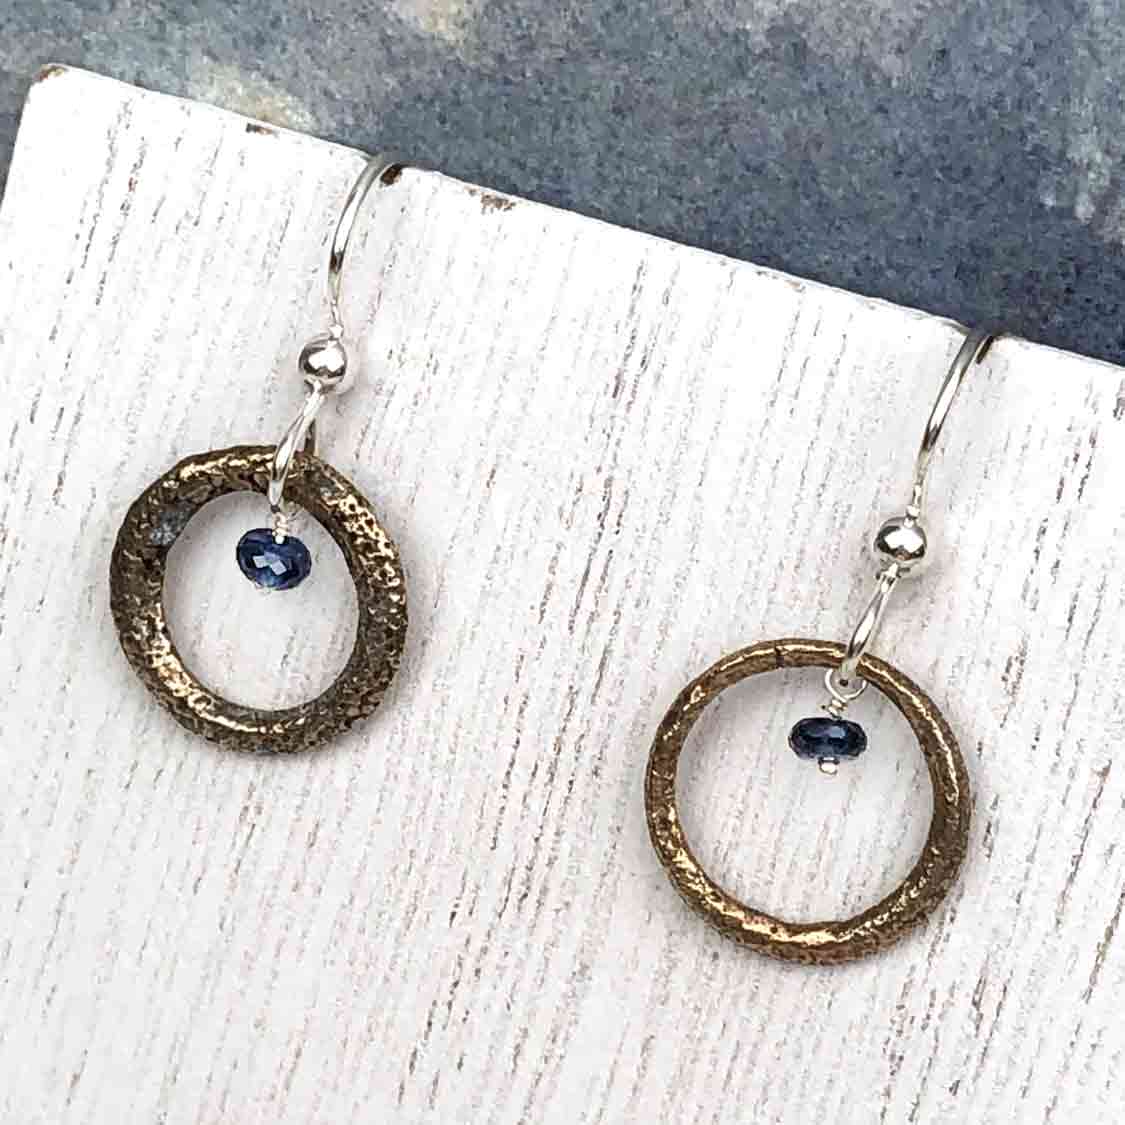 Petite Bright Bronze Celtic Ring Money Earrings with Genuine Sapphire